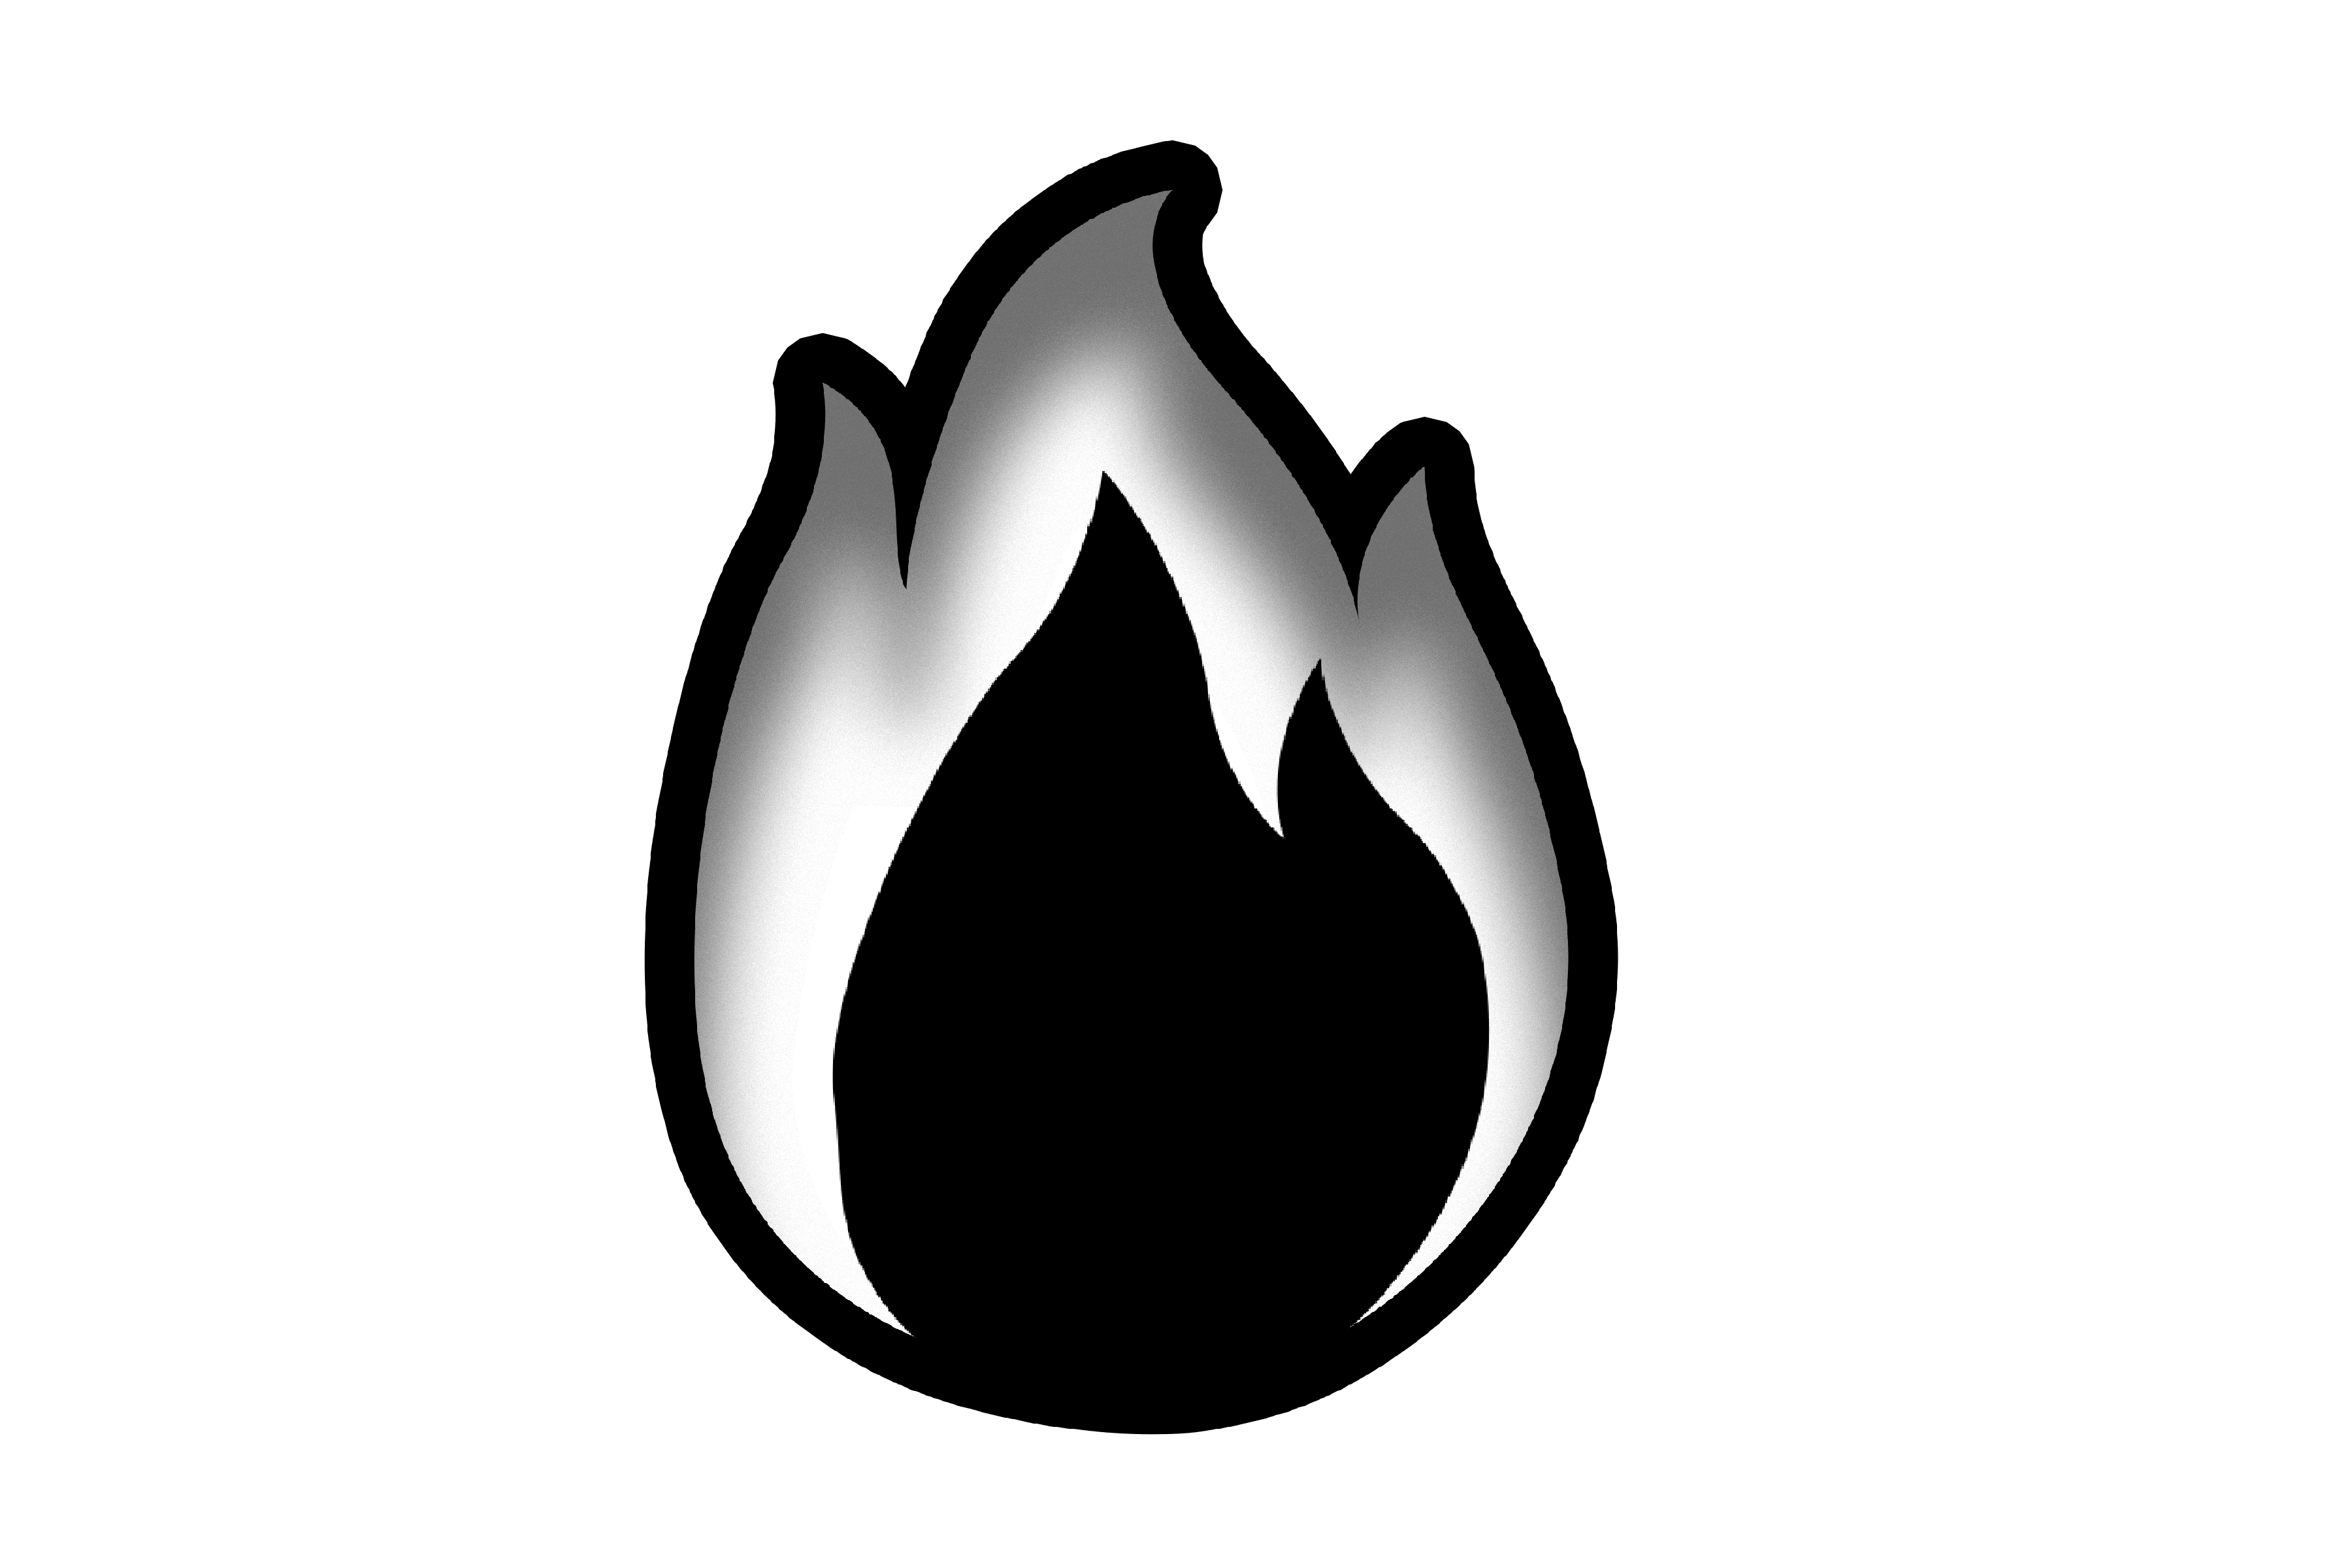 Black Fire PNG